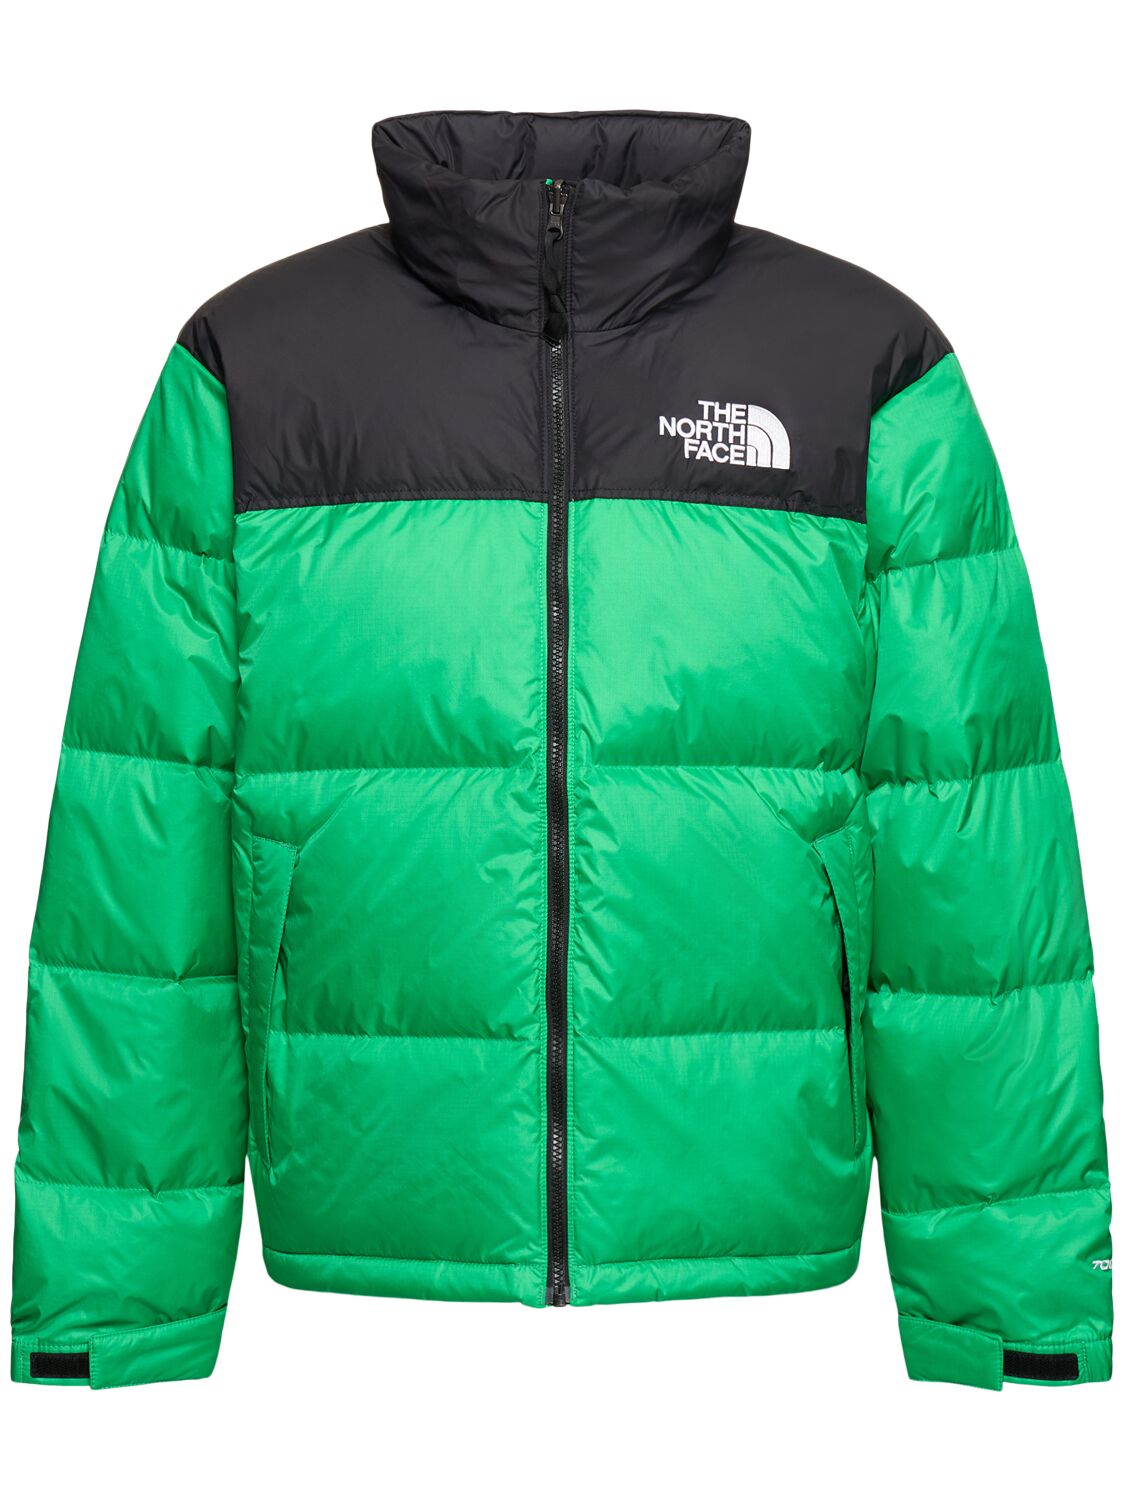 THE NORTH FACE 1996 RETRO DOWN JACKET